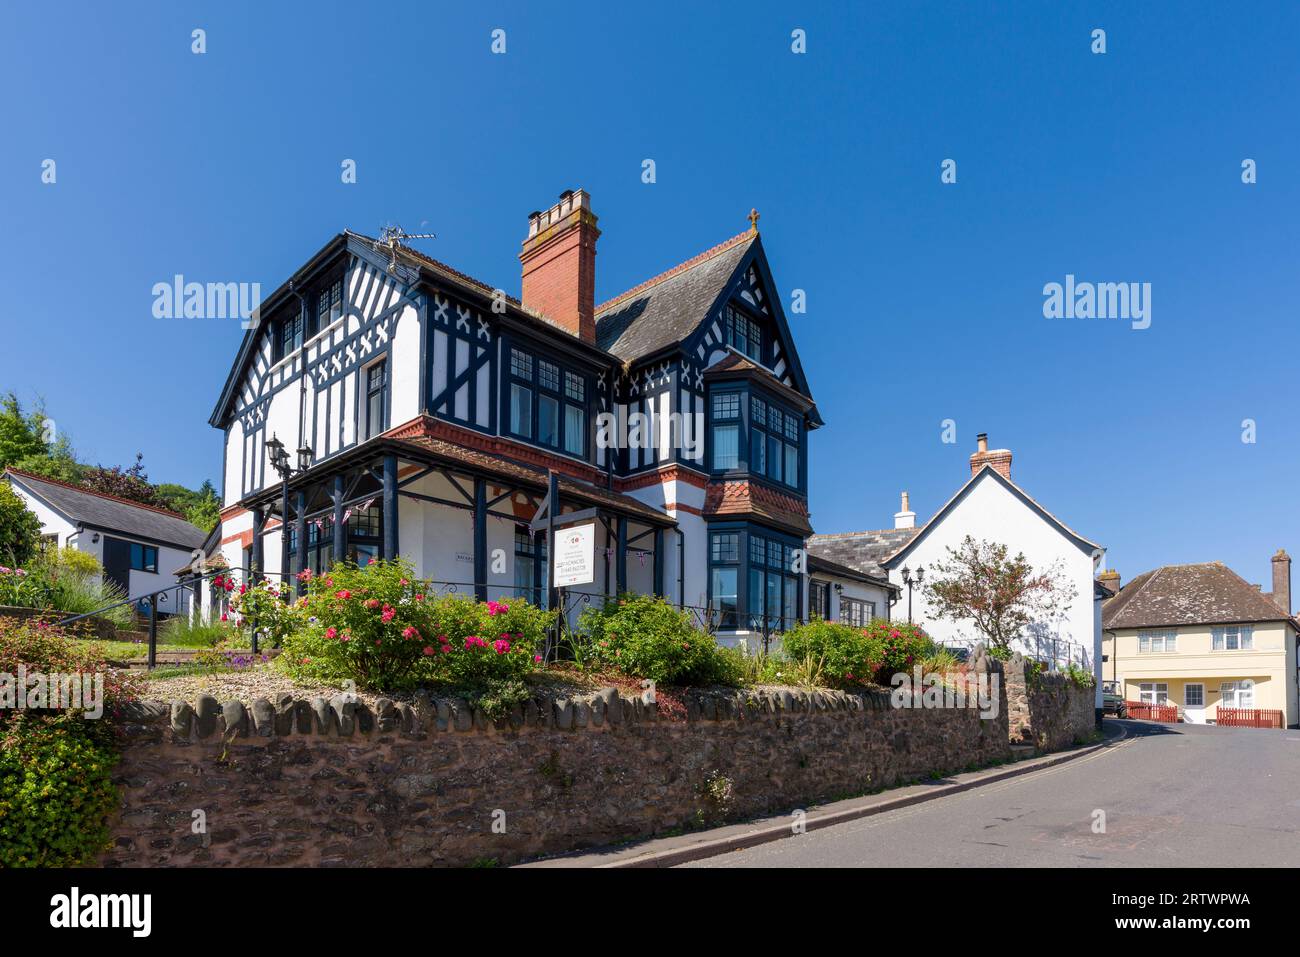 A bed and breakfast establishment on the High Street in the village of Porlock, Exmoor National Park, Somerset, England. Stock Photo